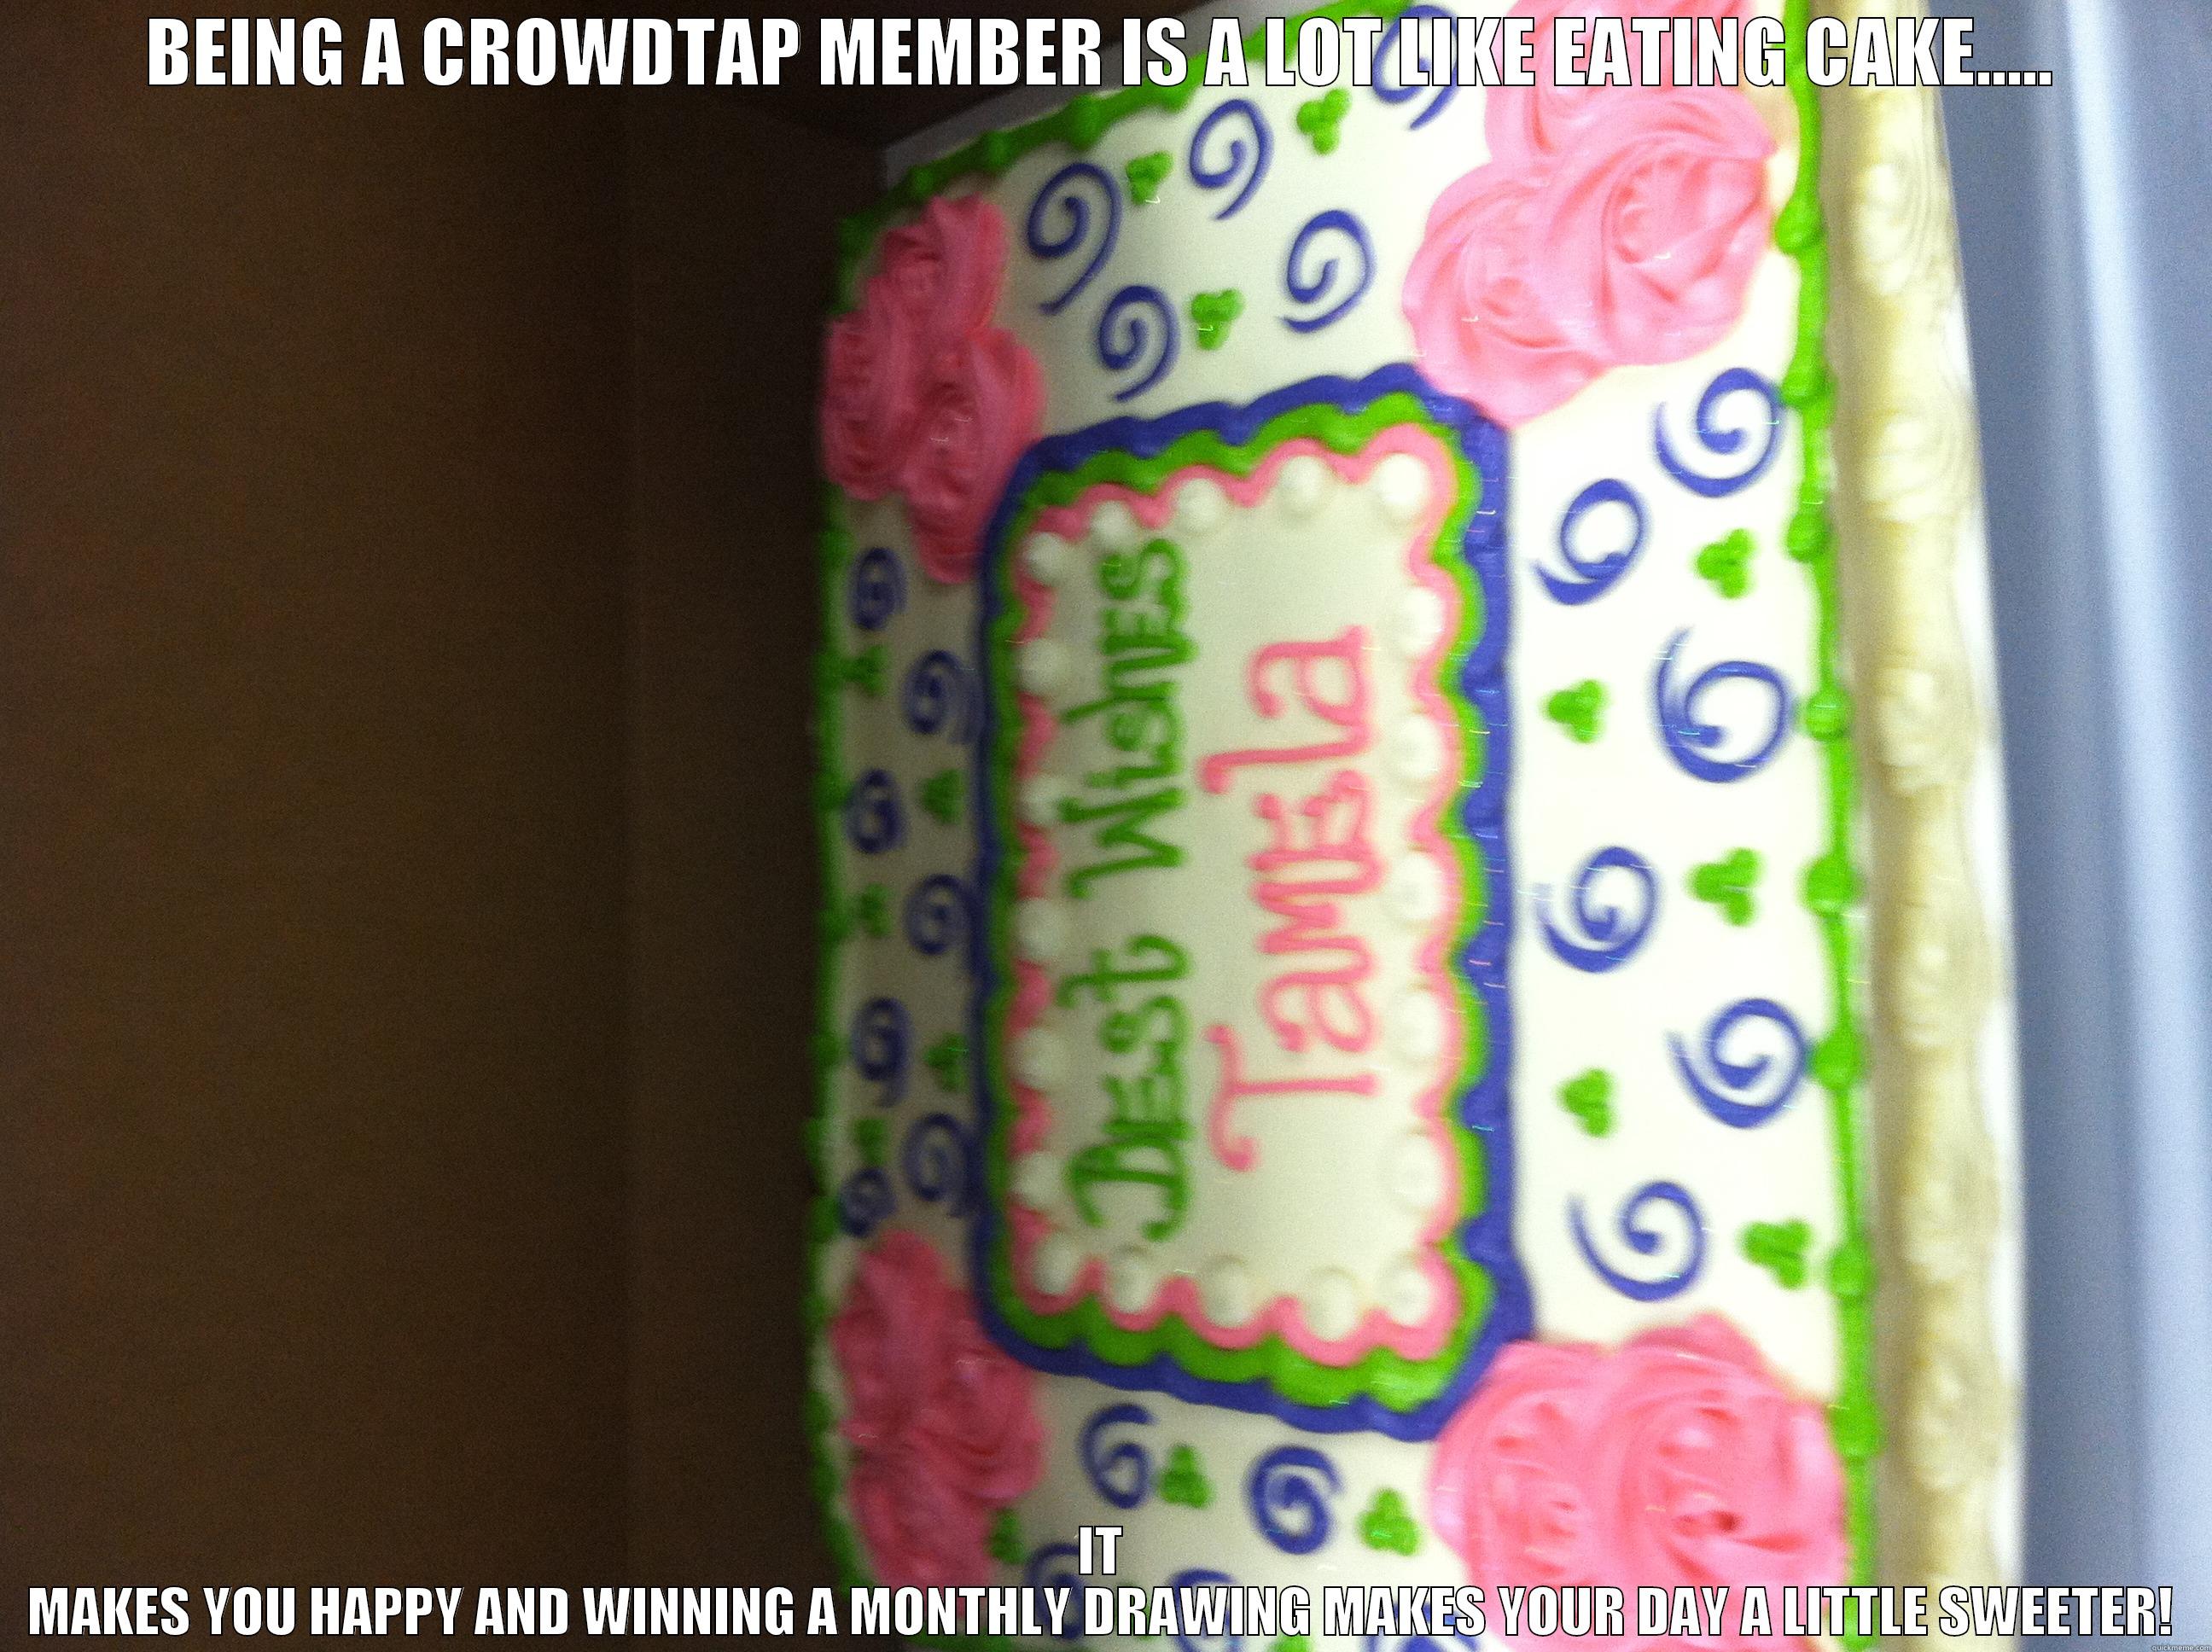  BEING A CROWDTAP MEMBER IS A LOT LIKE EATING CAKE.....  IT MAKES YOU HAPPY AND WINNING A MONTHLY DRAWING MAKES YOUR DAY A LITTLE SWEETER! Misc